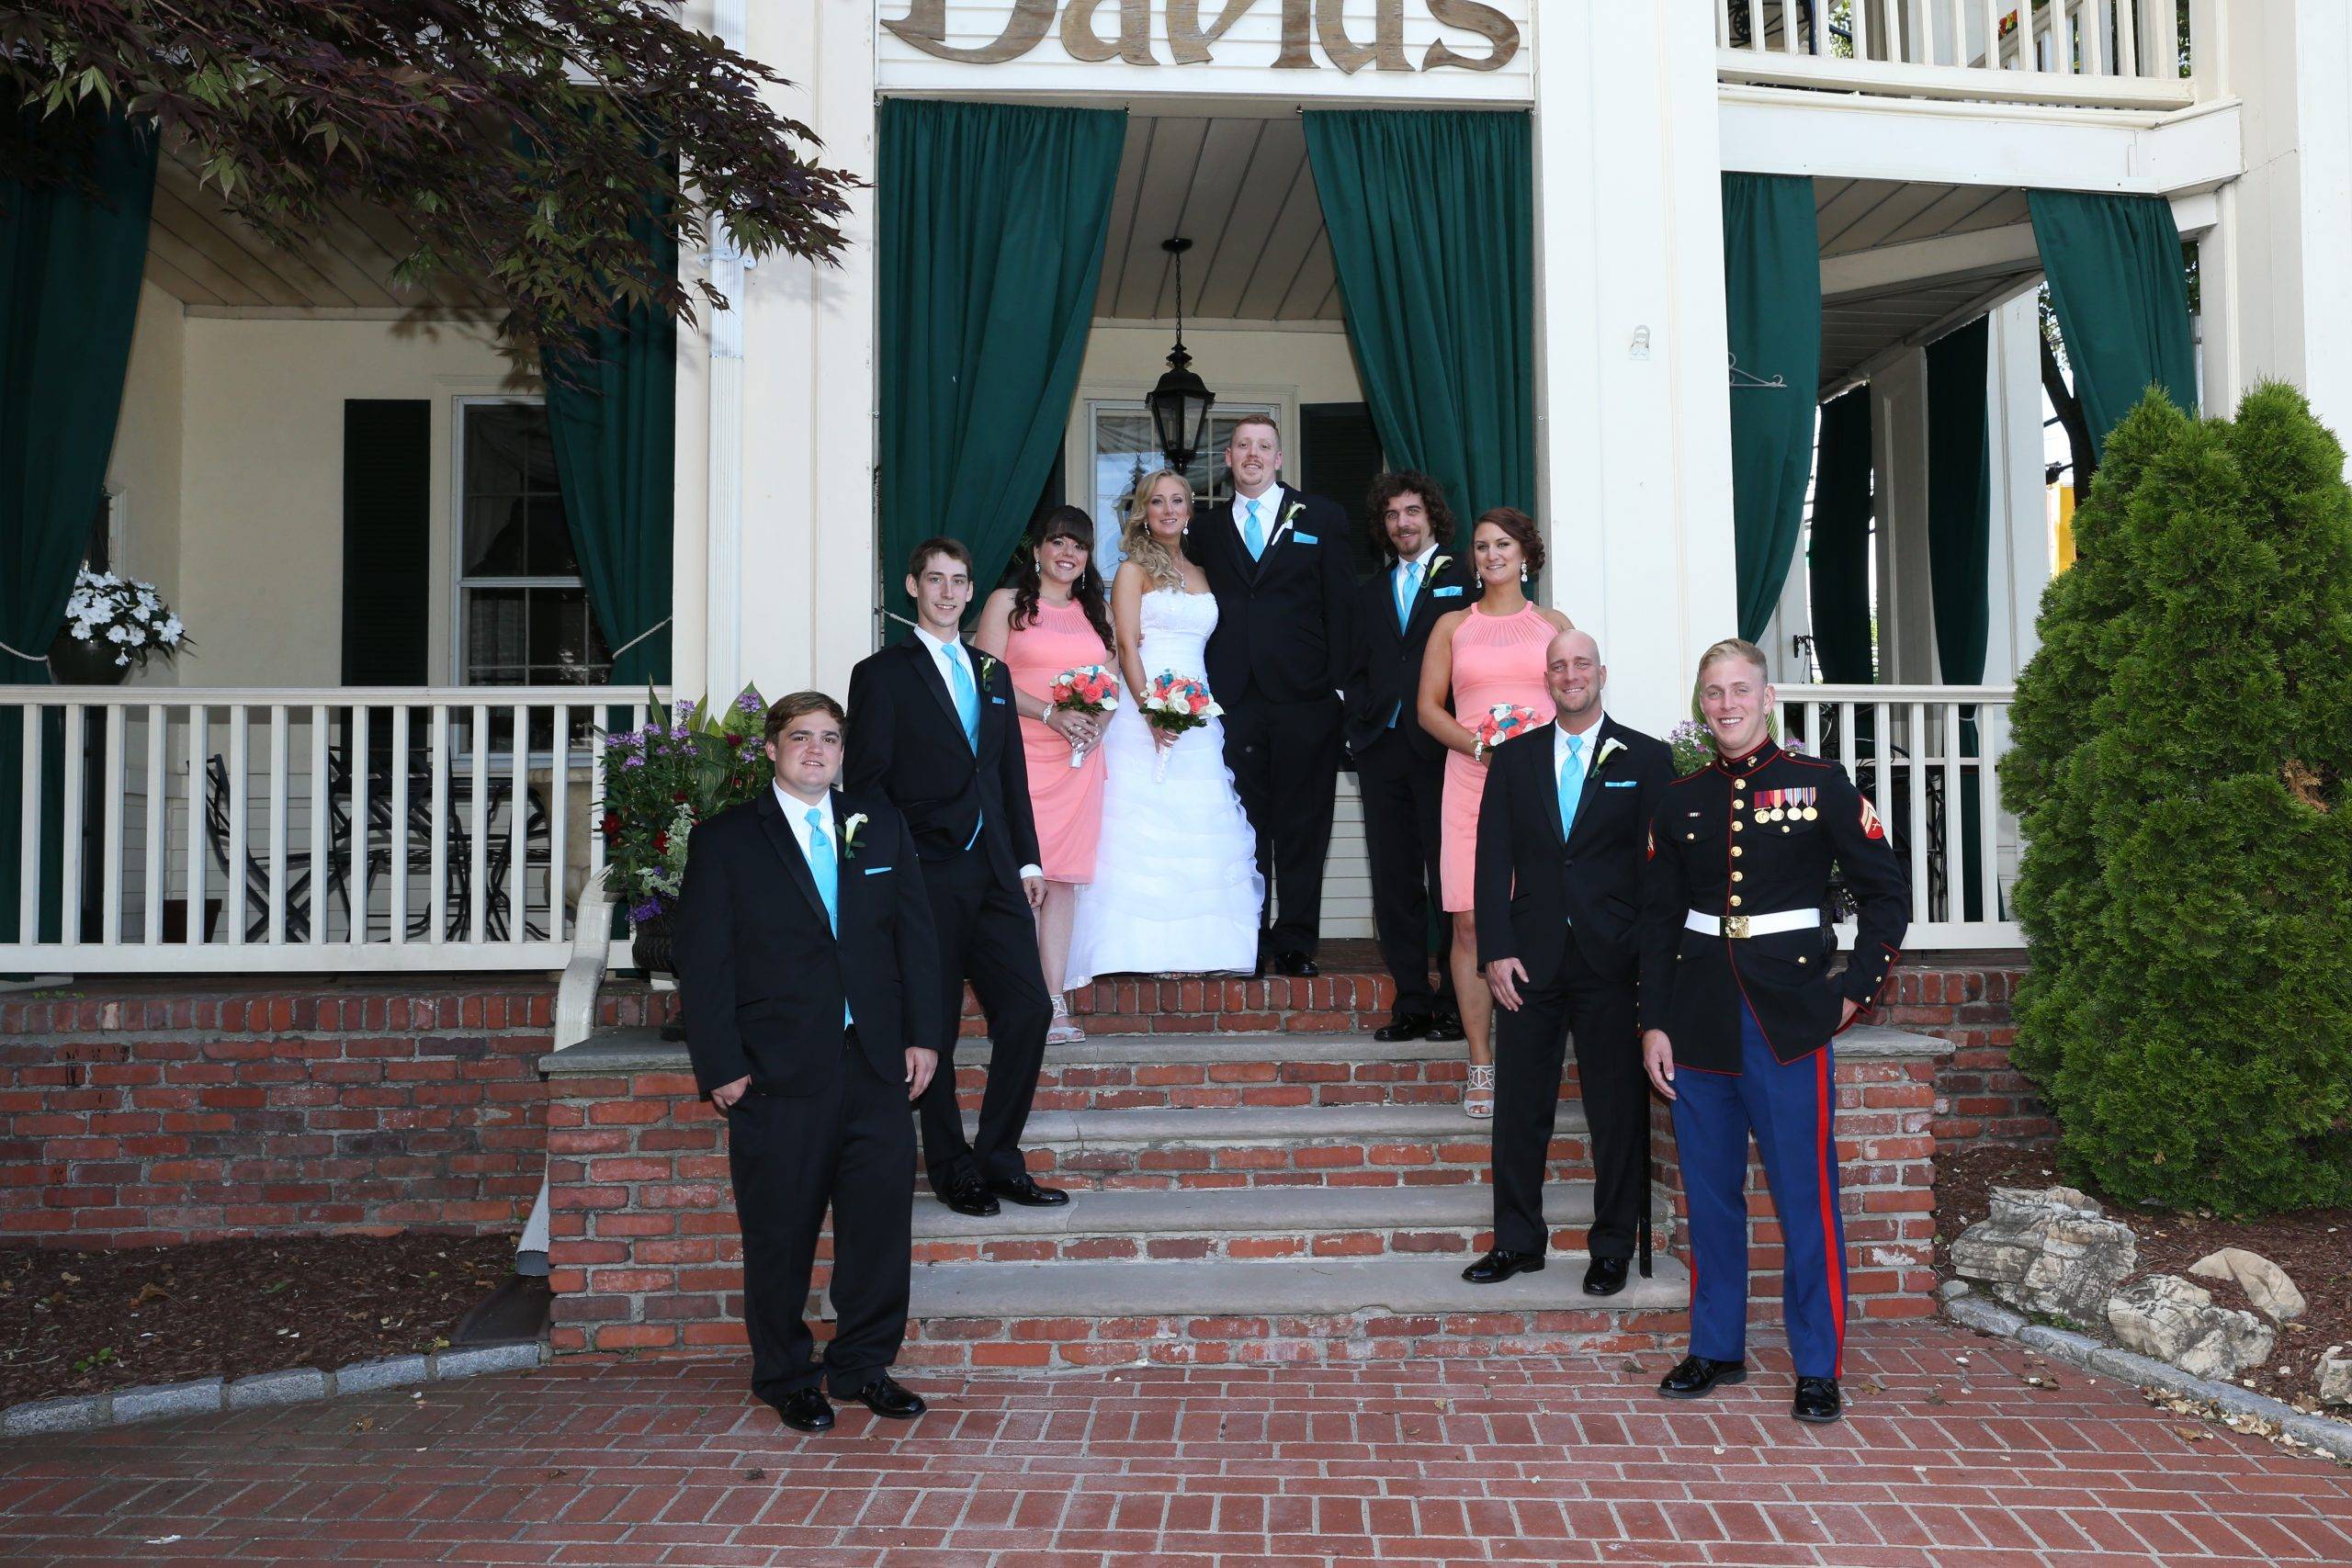 A wedding party posing in front of a house.